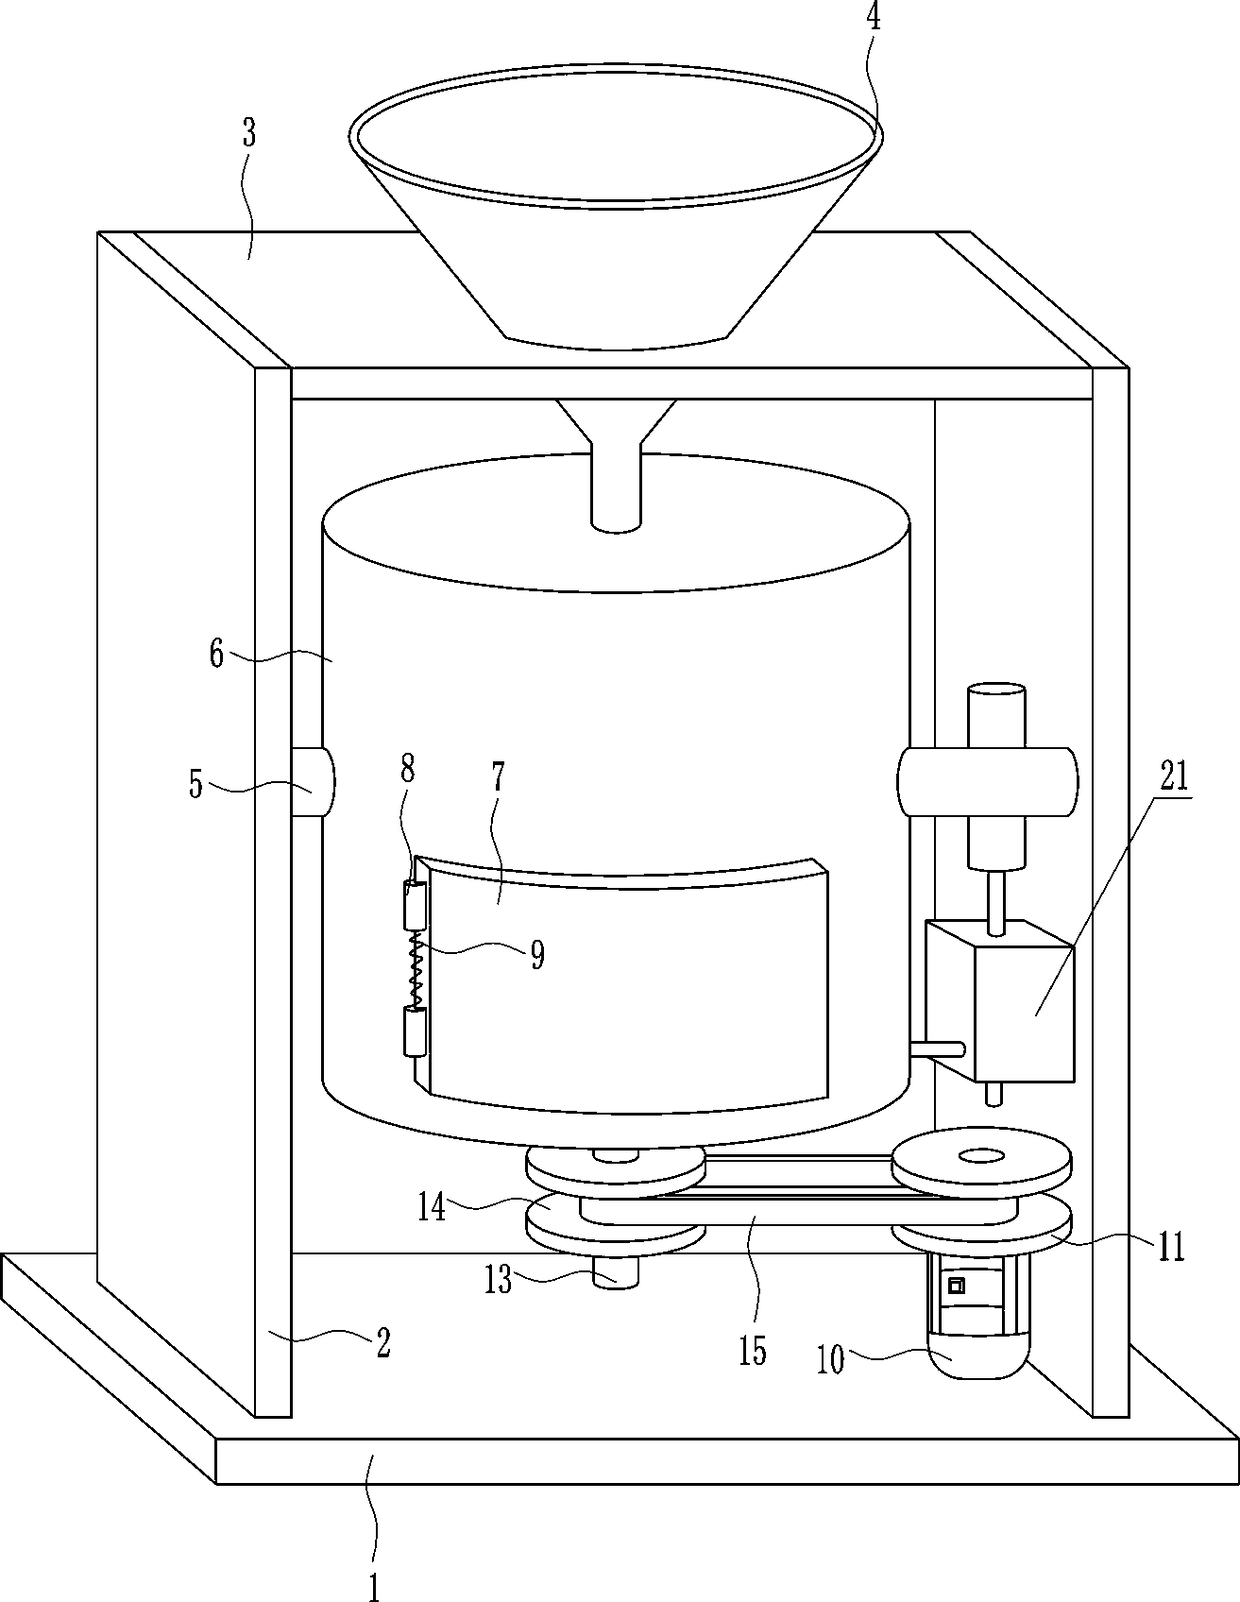 A pulverizing and drying integrated equipment for storage of medical medicinal materials